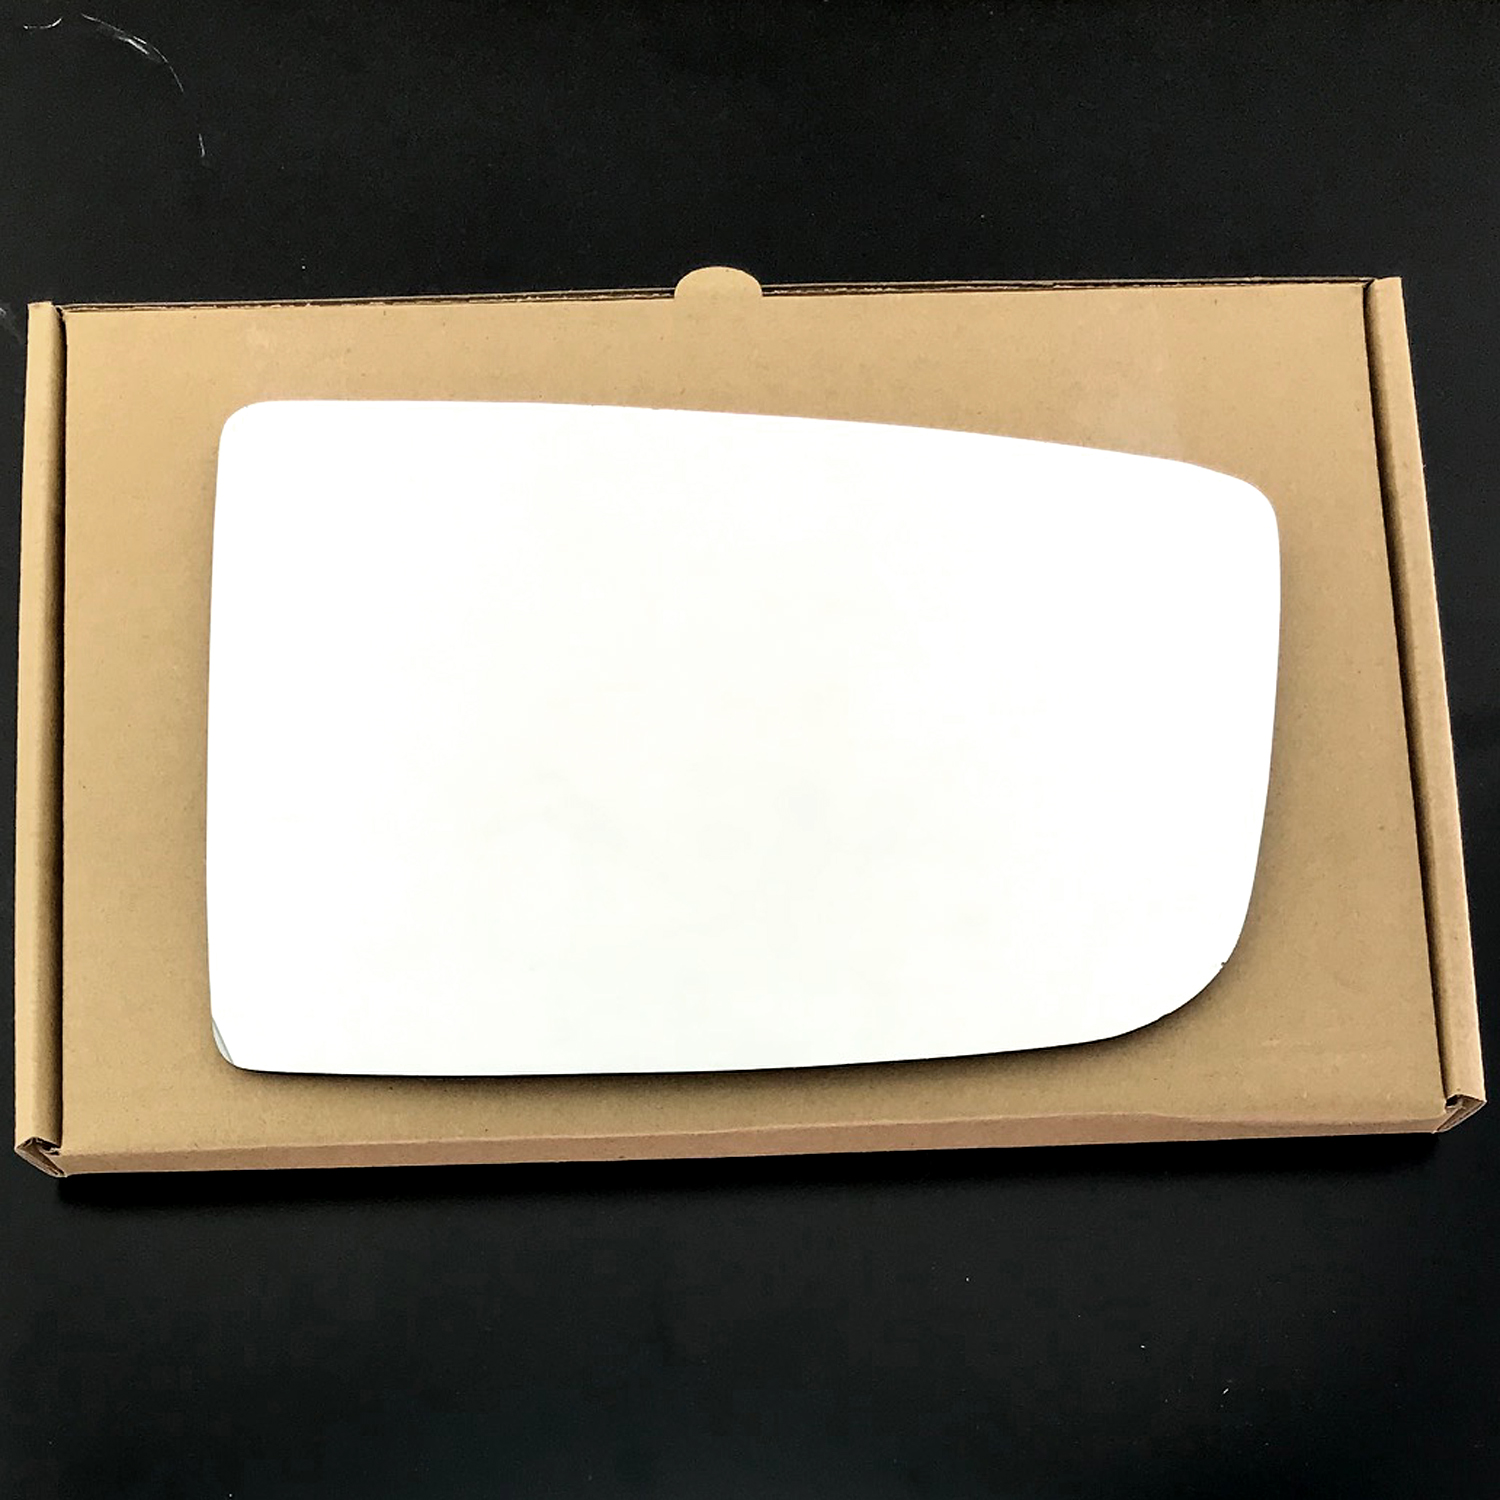 Mercedes Sprinter Wing Mirror Glass RIGHT HAND ( UK Driver Side ) 2006 to 2011 – Convex Wing Mirror ( Slide On Fitting )